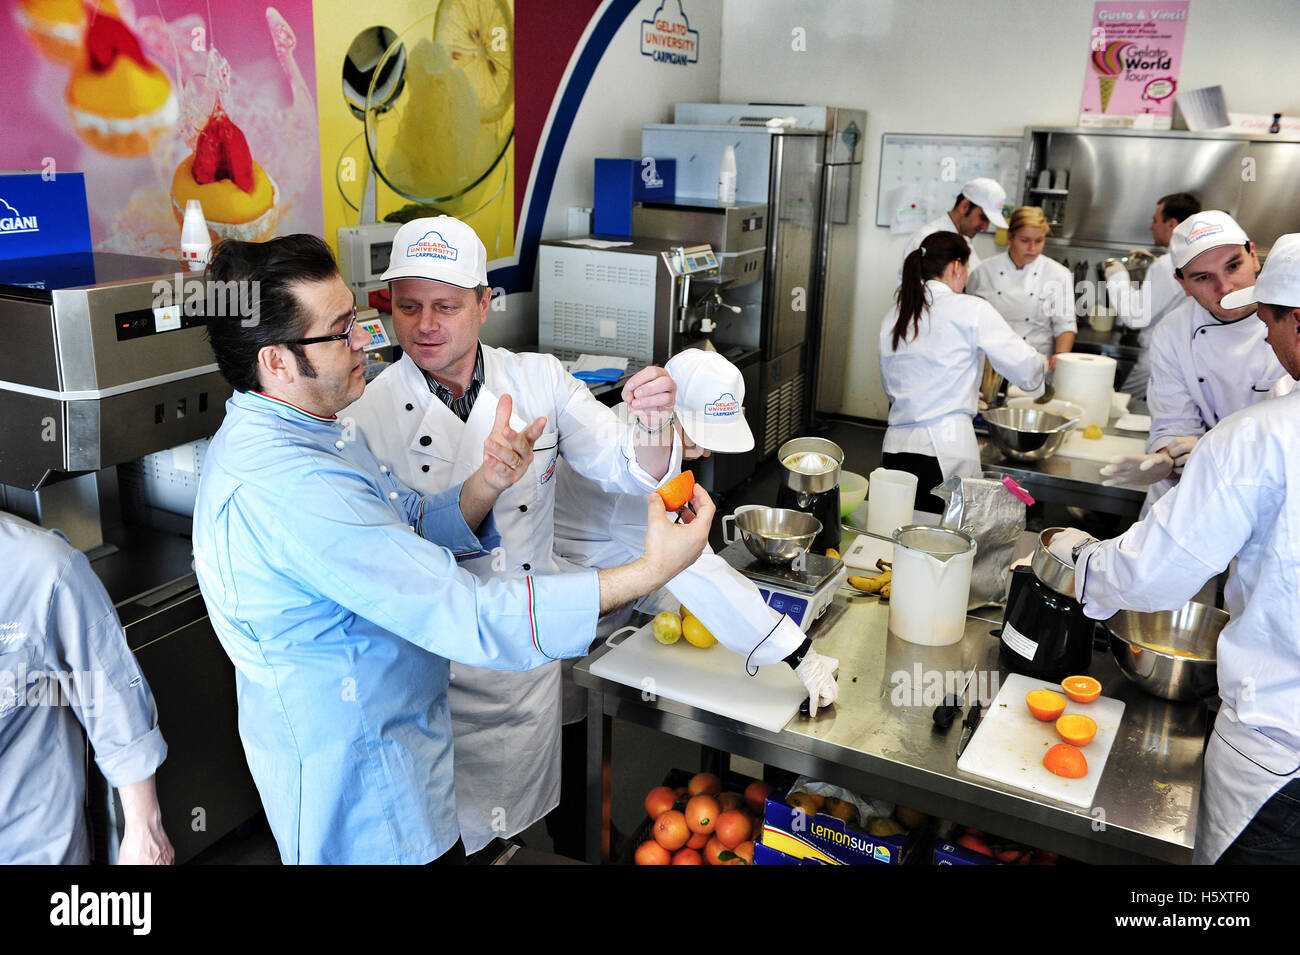 The hustle and bustle of a practical lesson at the Carpigiani Gelato University in Anzola nell'Emilia near Bologna, Italy Stock Photo